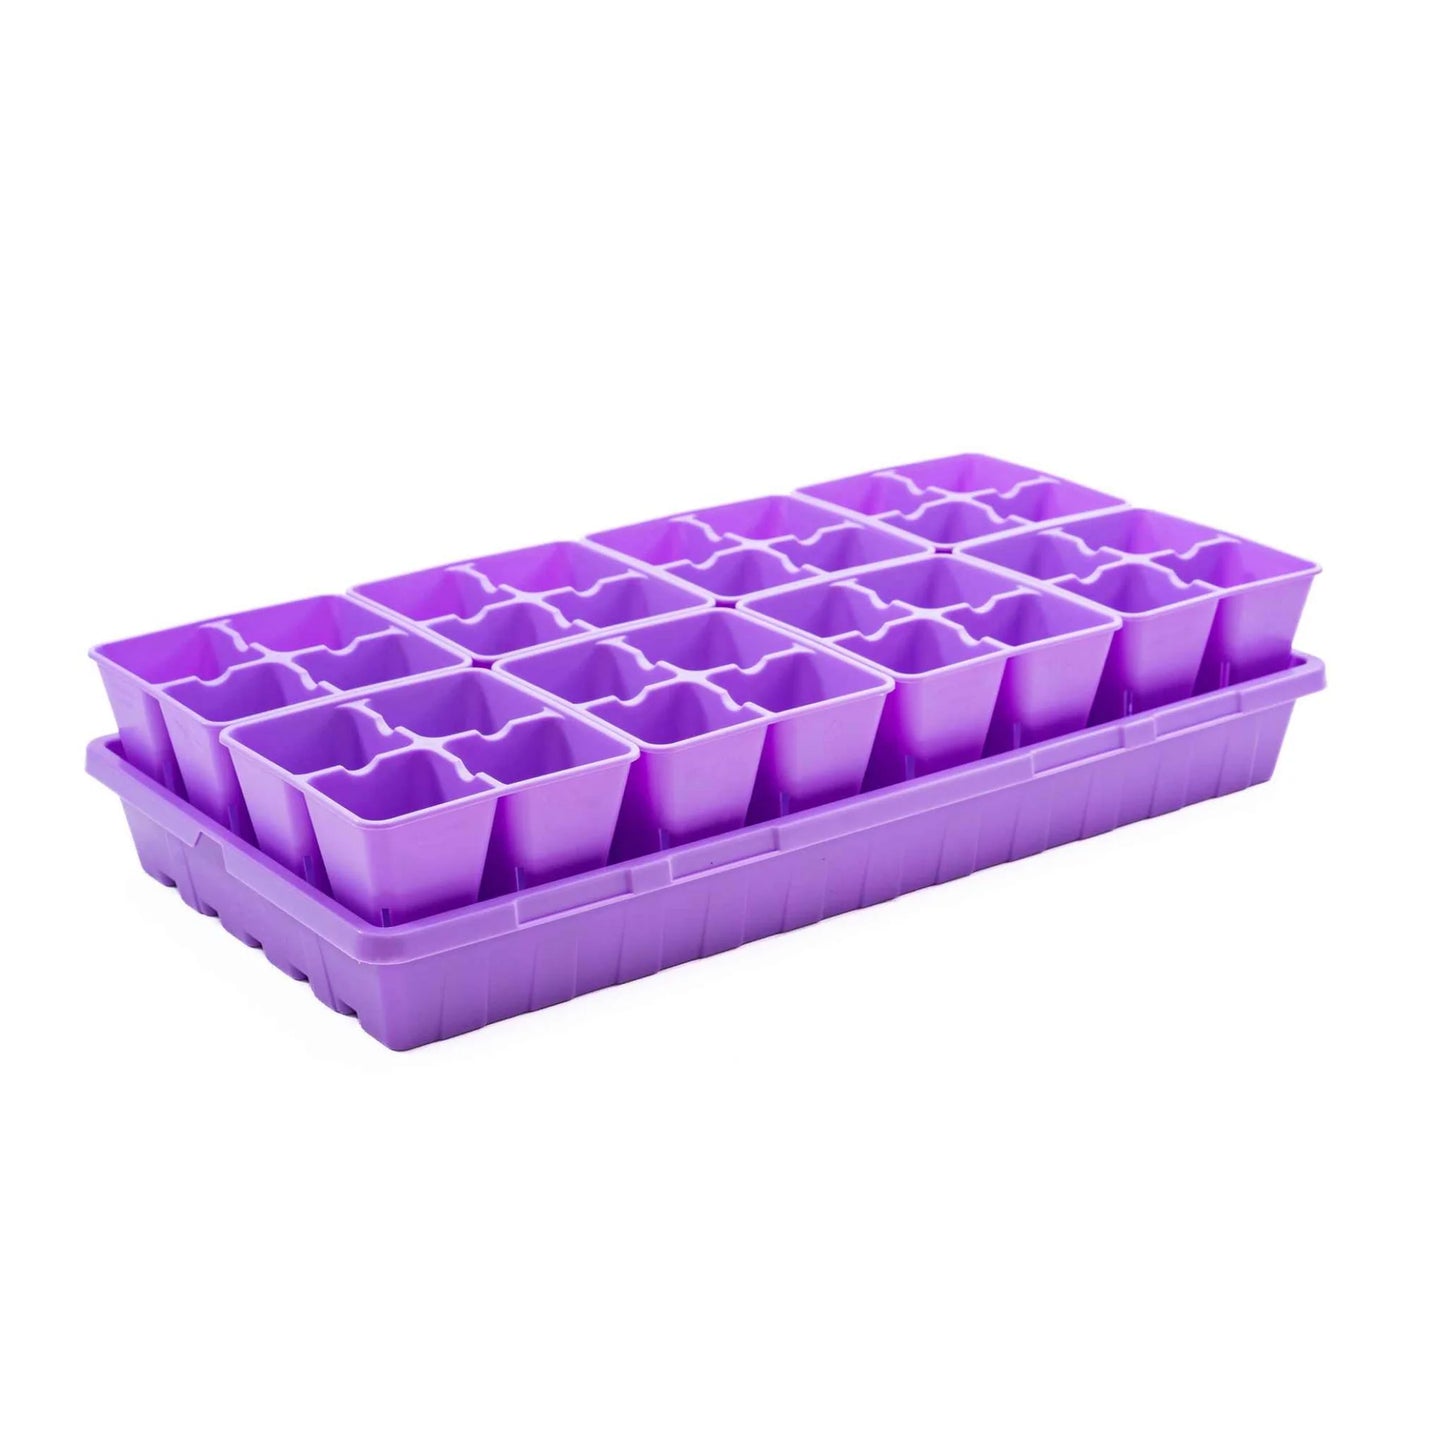 4 Cell Seed Starting Tray Insert